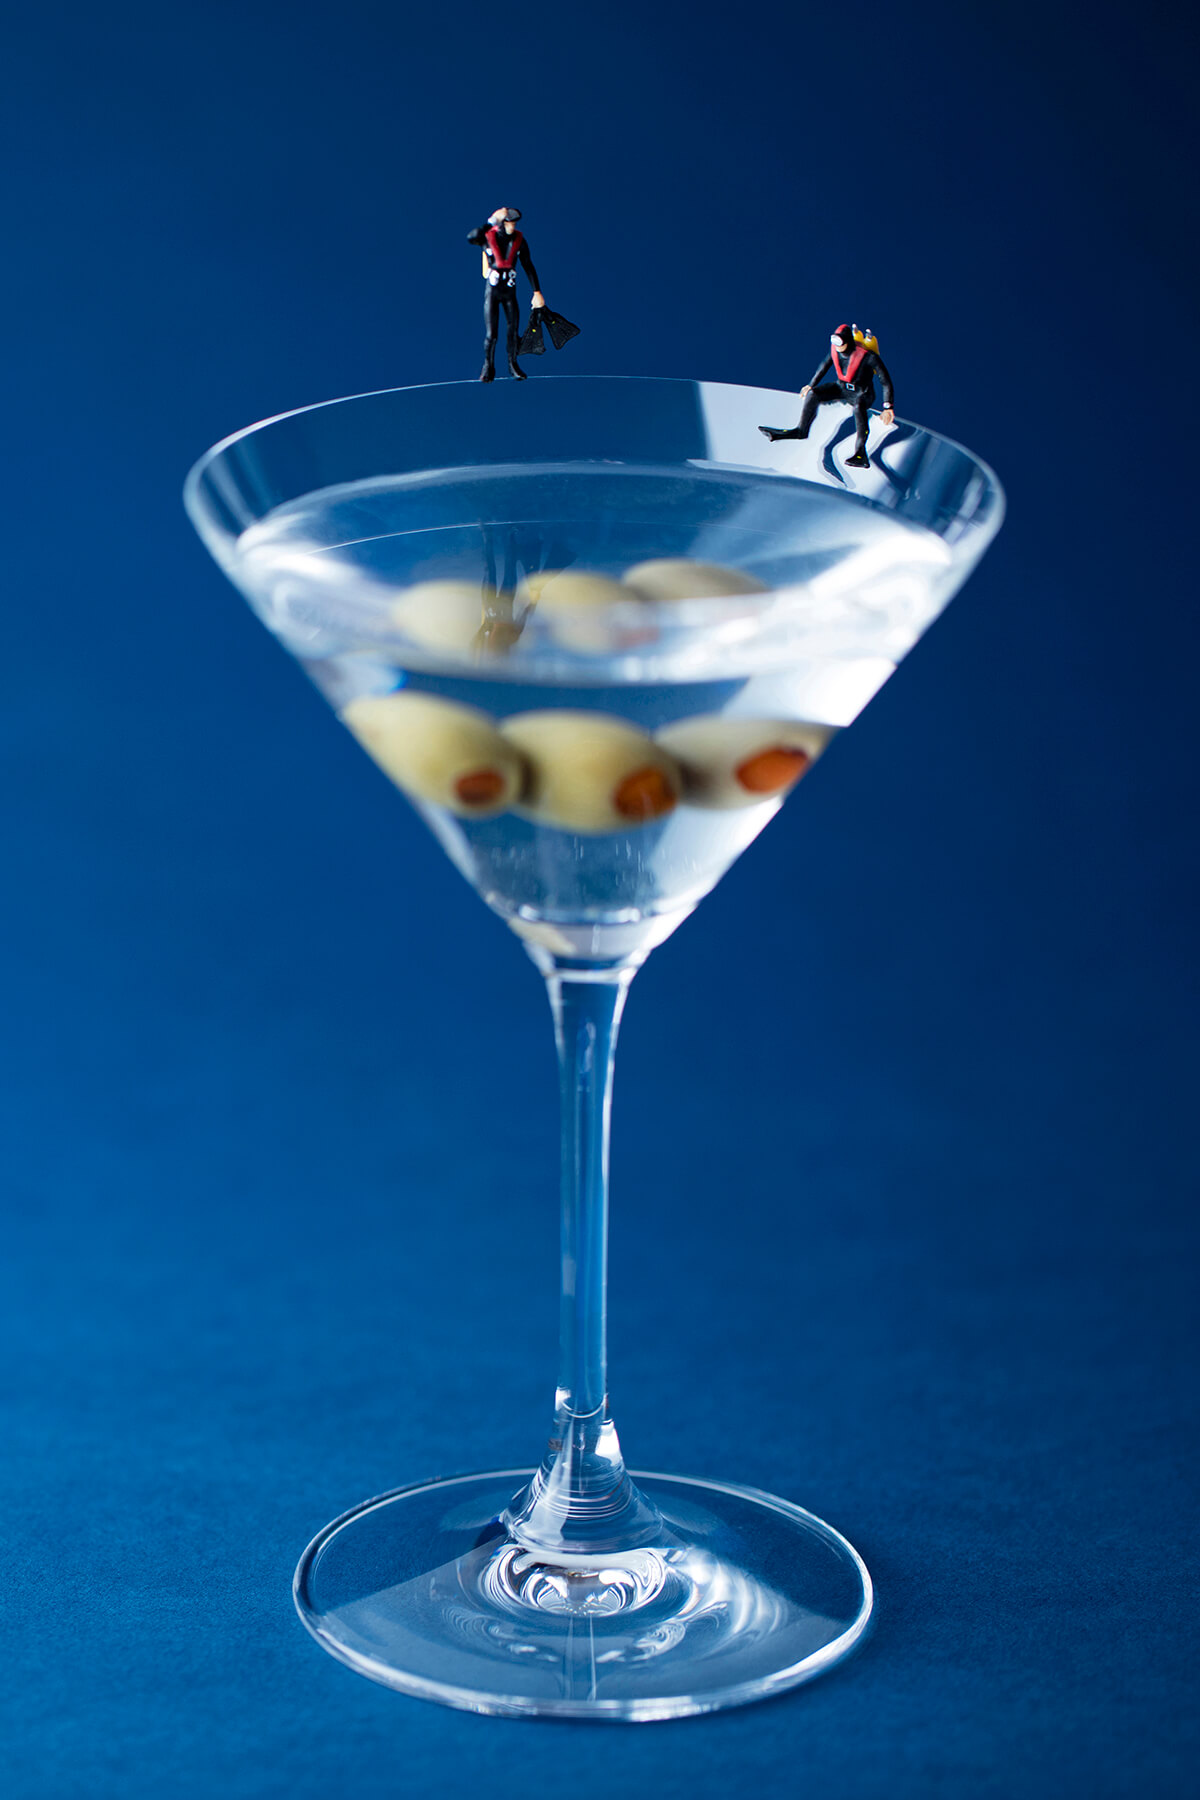 On the rim of a classic crystal martini glass, filled with clear liquid and three pimento-stuffed olives, are two figures, one standing, and the other sitting but both look into the glass dressed out in full wetsuits. The glass is situated in front of a royal blue backdrop.